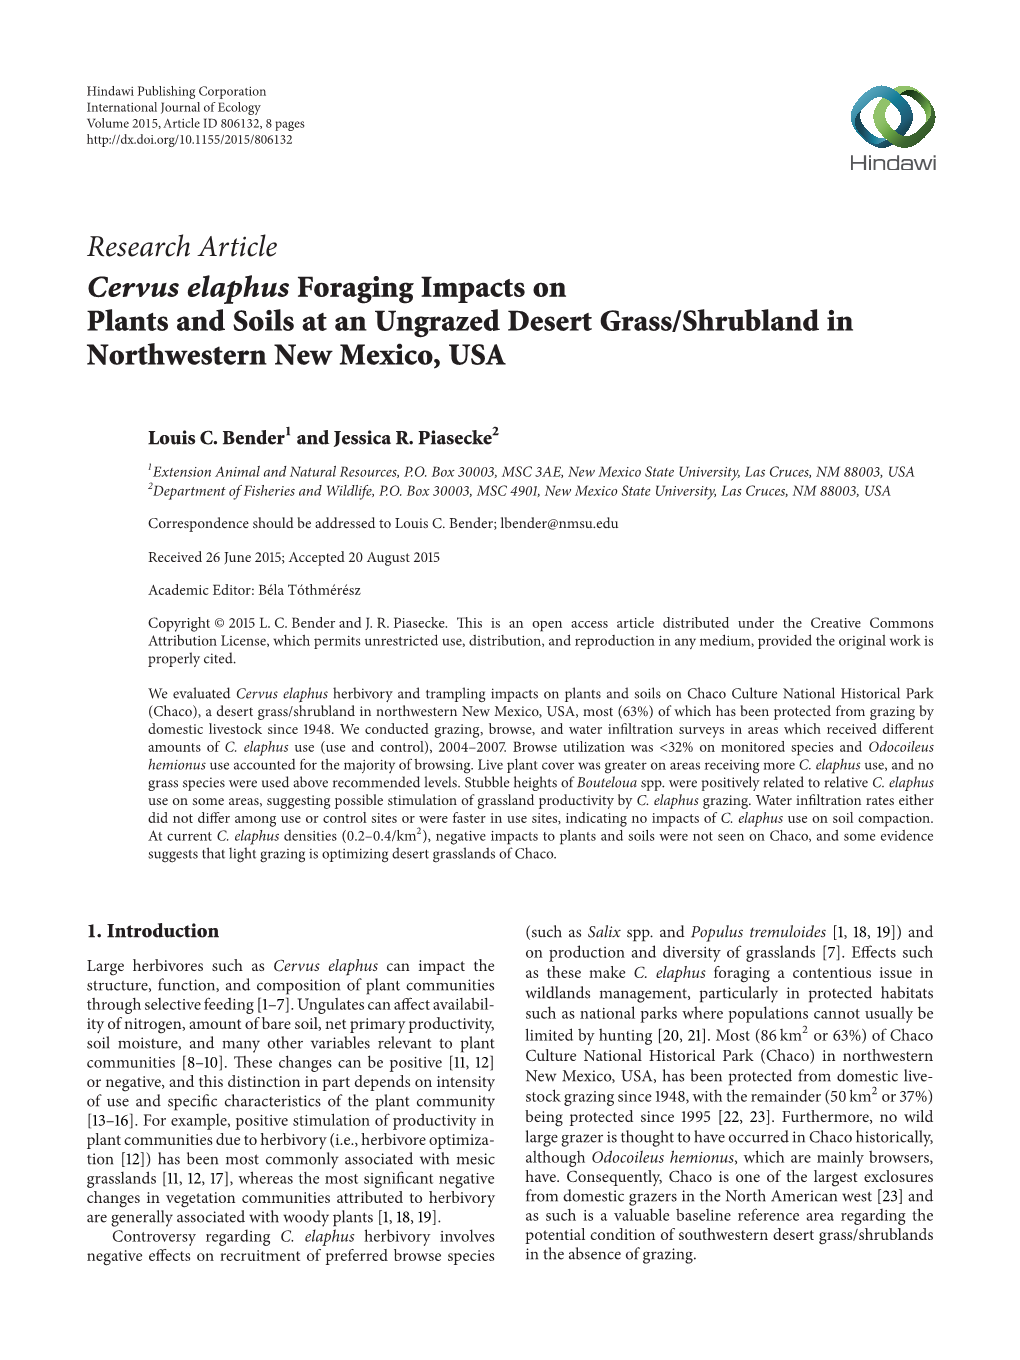 Cervus Elaphus Foraging Impacts on Plants and Soils at an Ungrazed Desert Grass/Shrubland in Northwestern New Mexico, USA